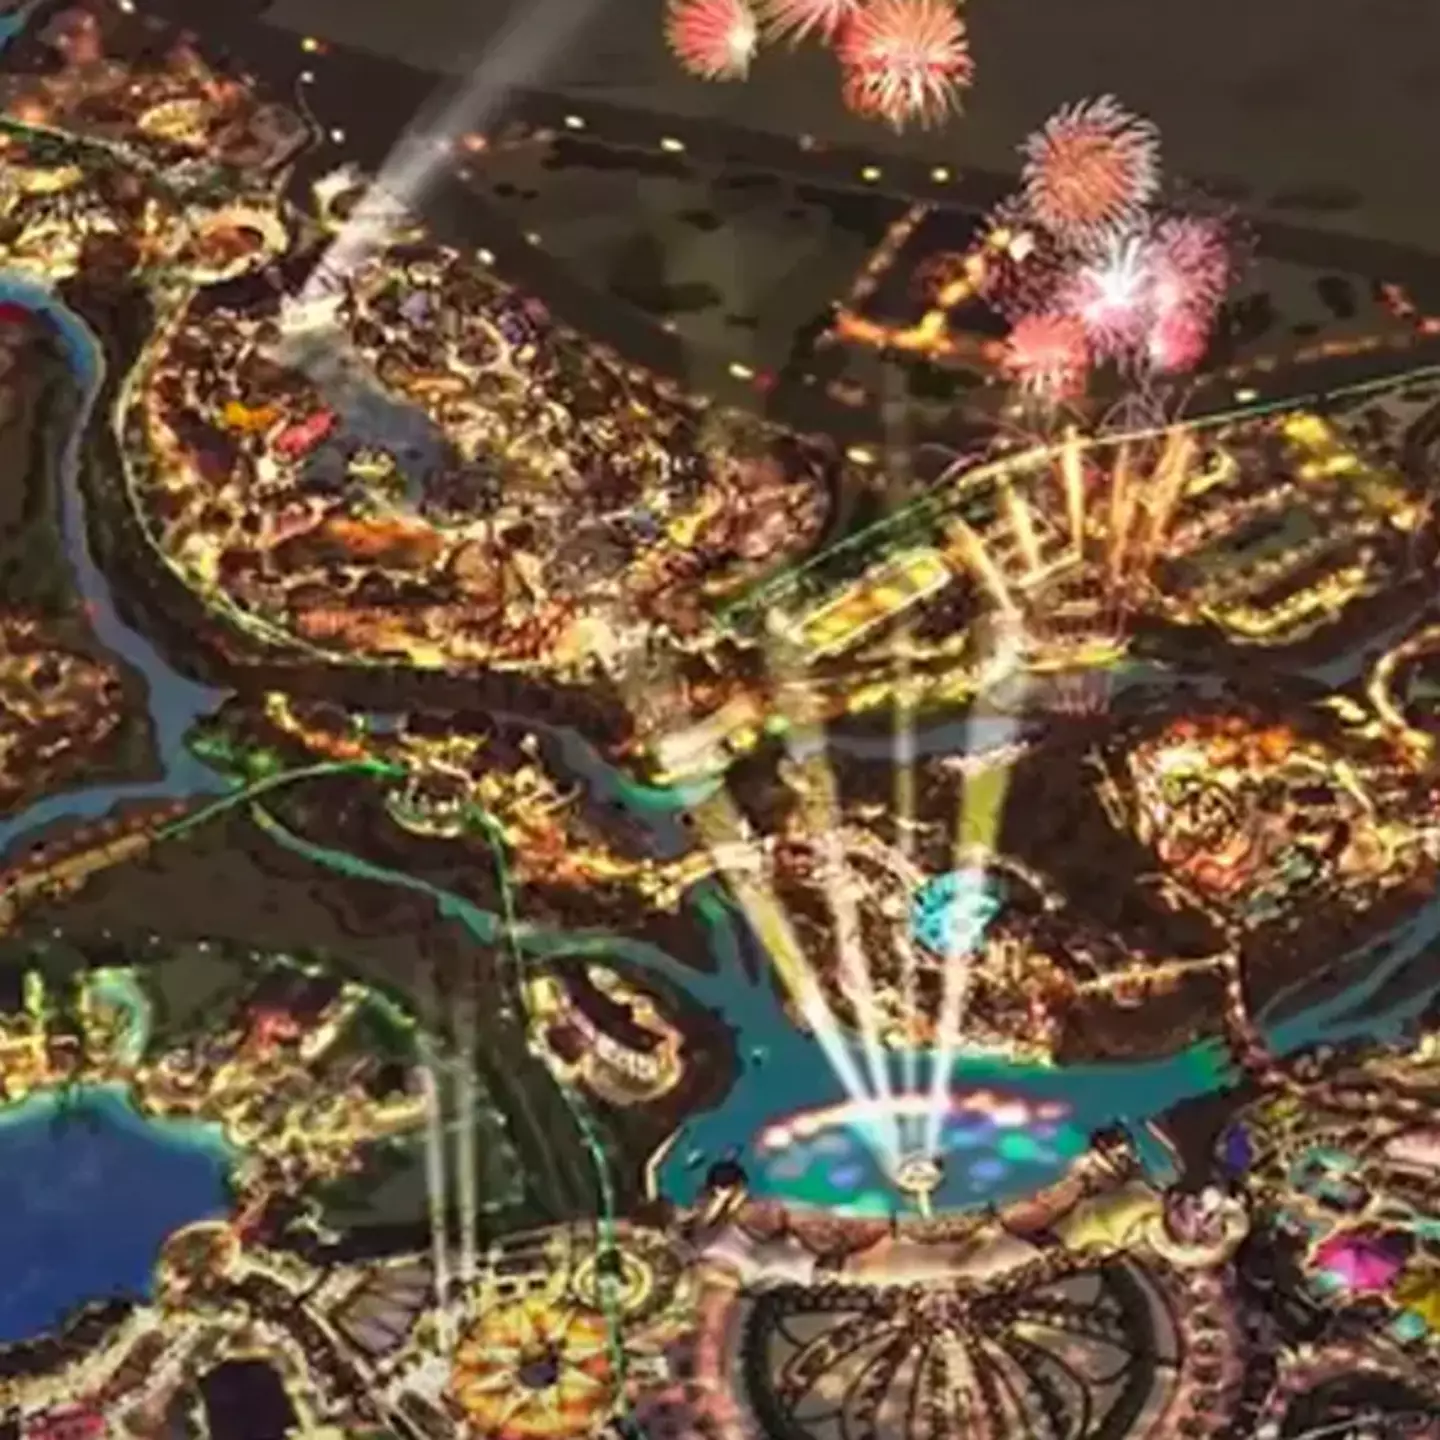 $55,000,000,000 billion theme park that's never had a single guest go there